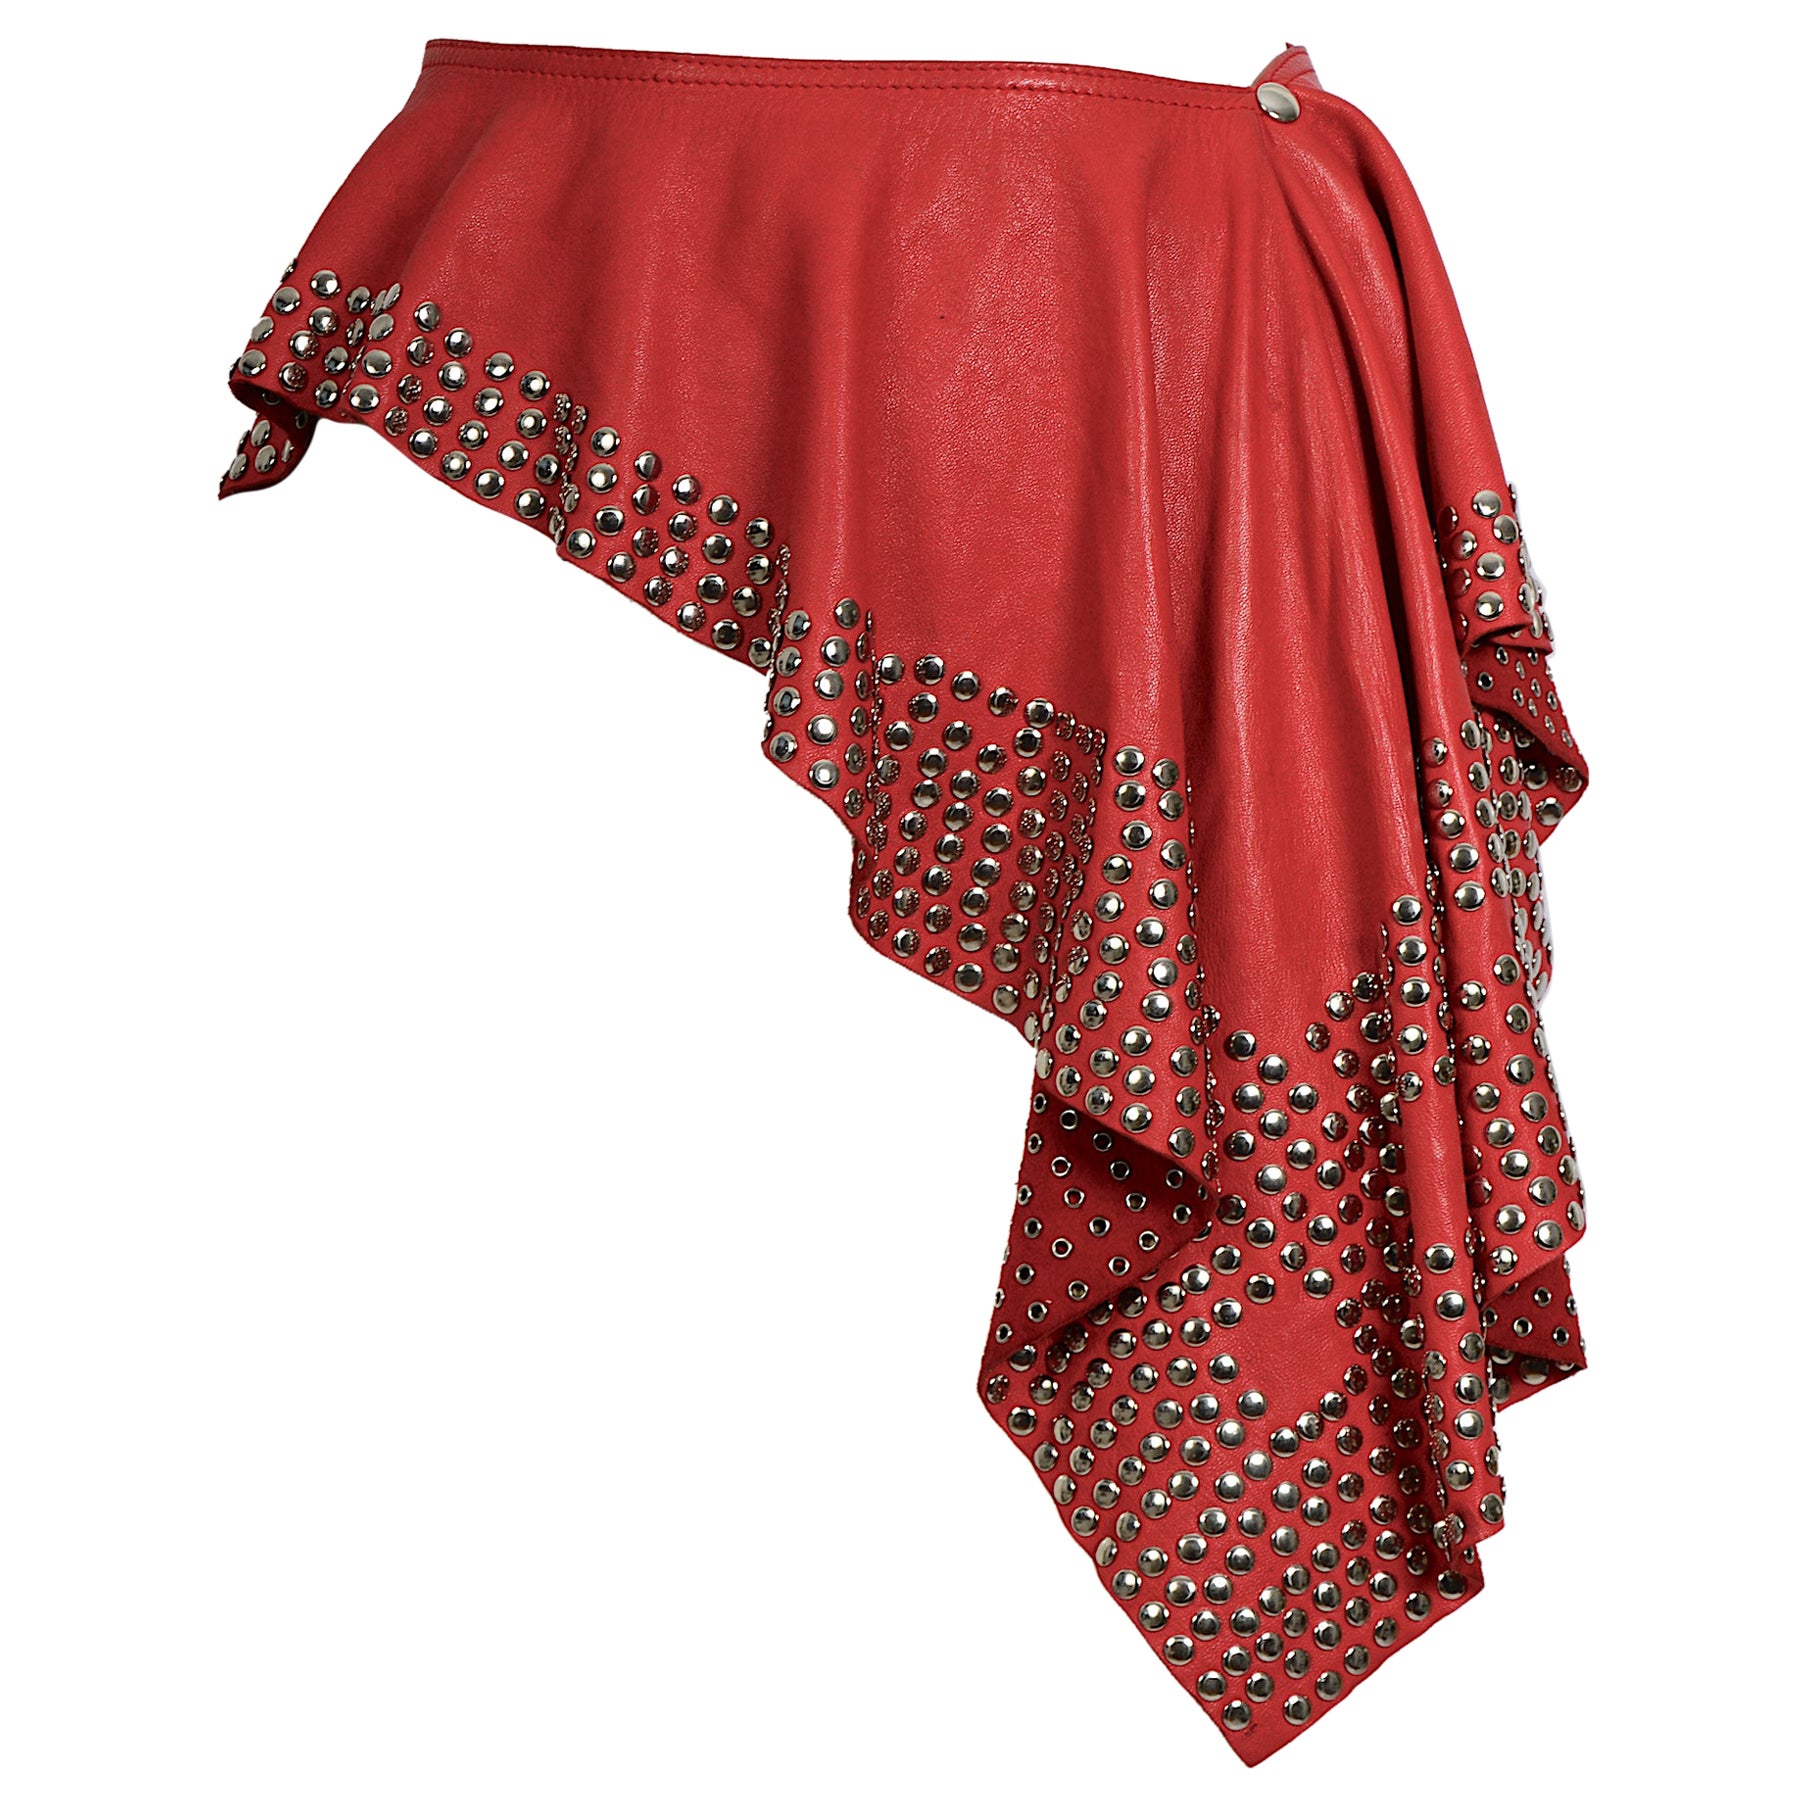 Azzedine Alaia circa 1981 collectors studded embellished red leather belt skirt For Sale